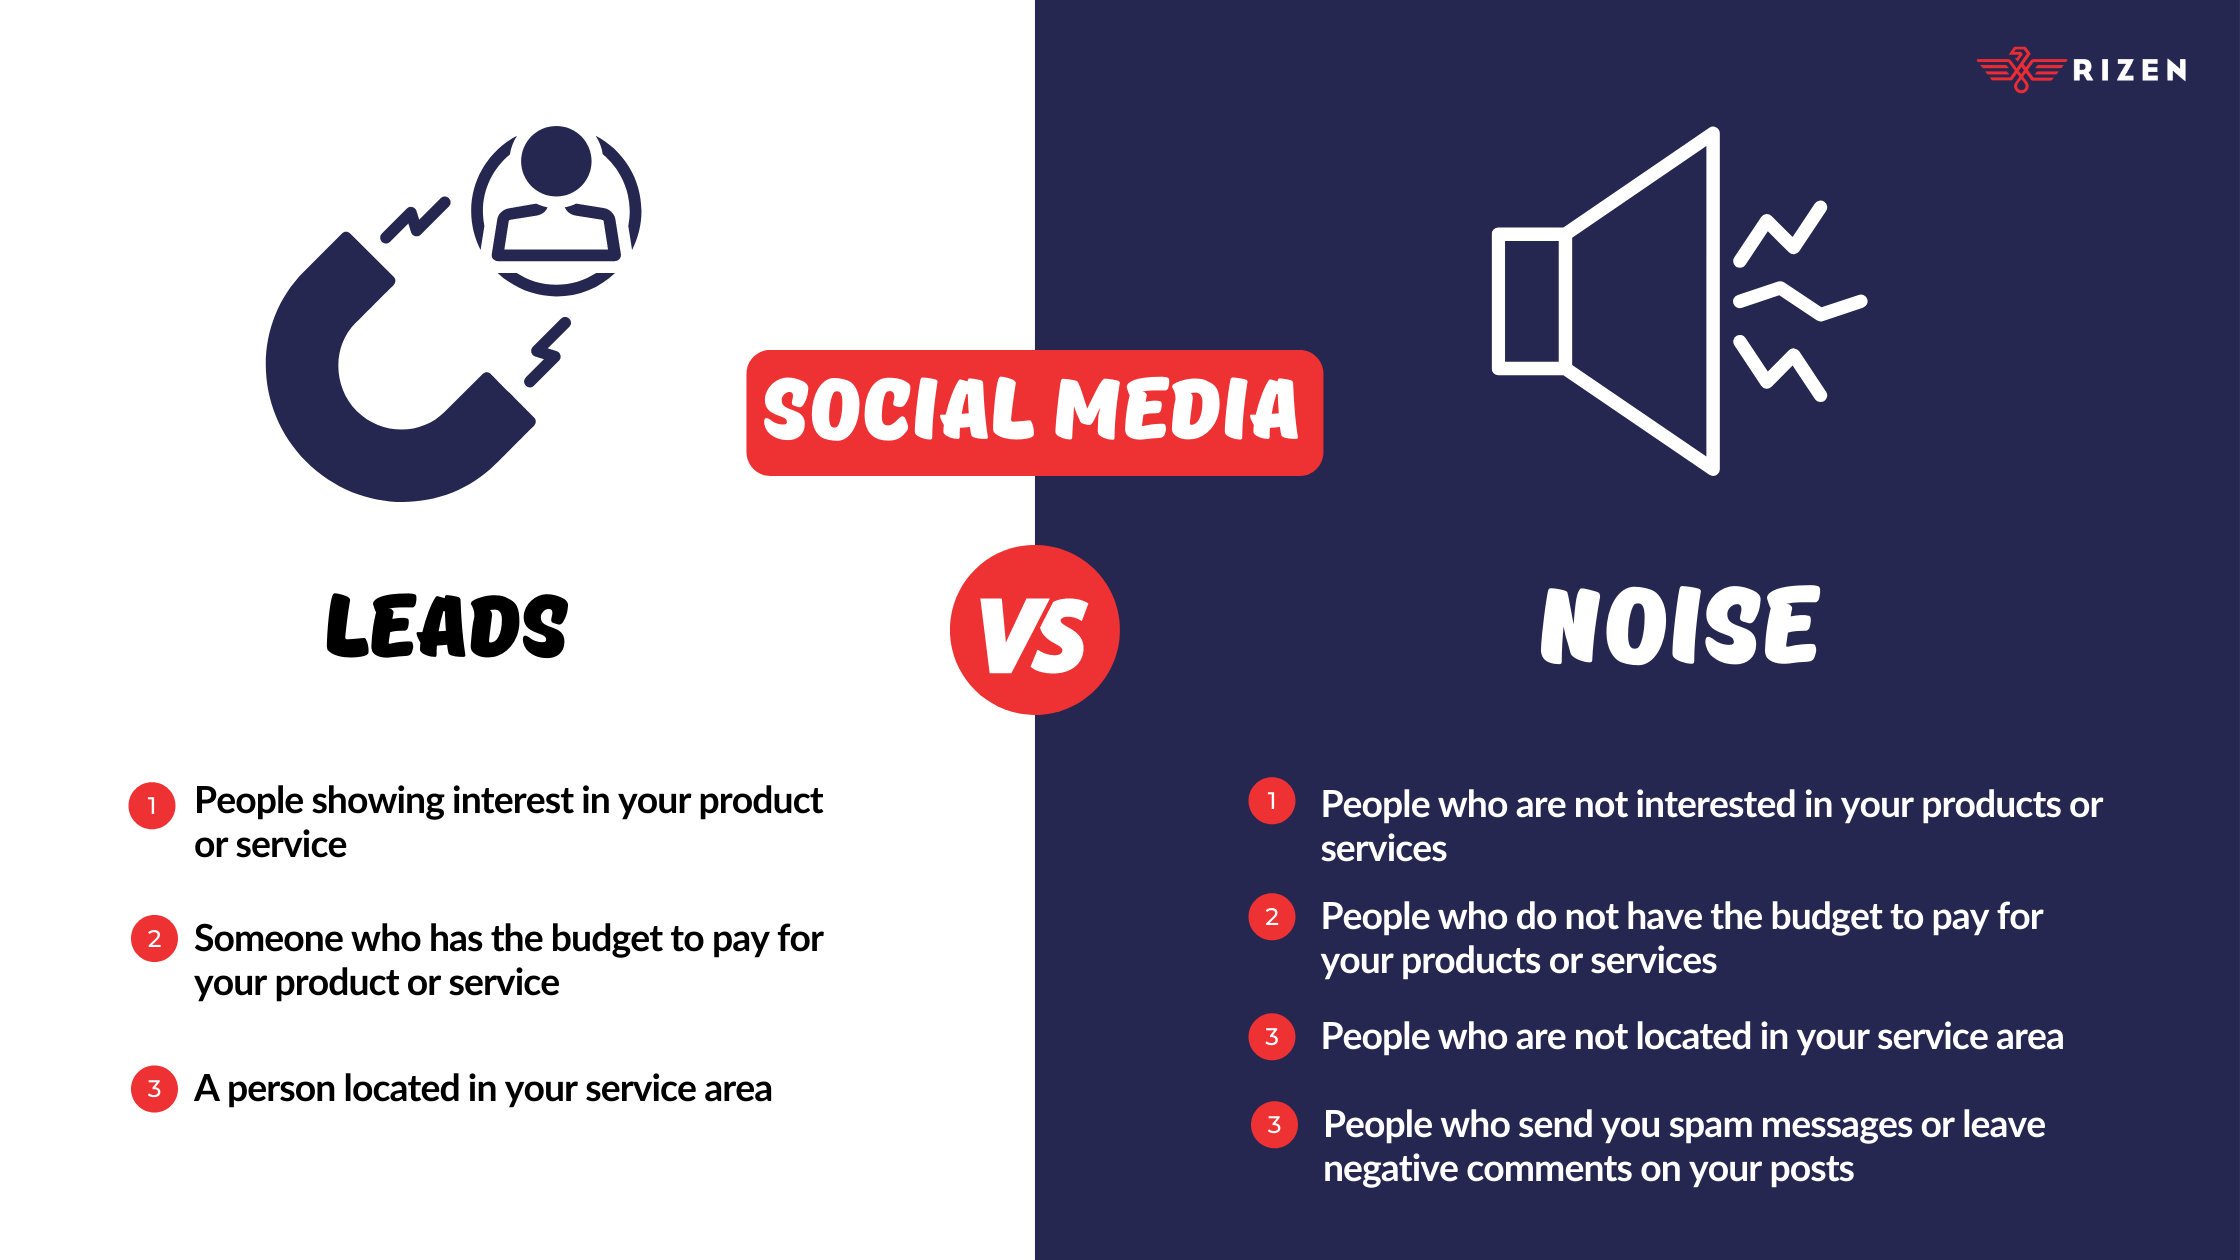 Comparing social media leads and social media noise